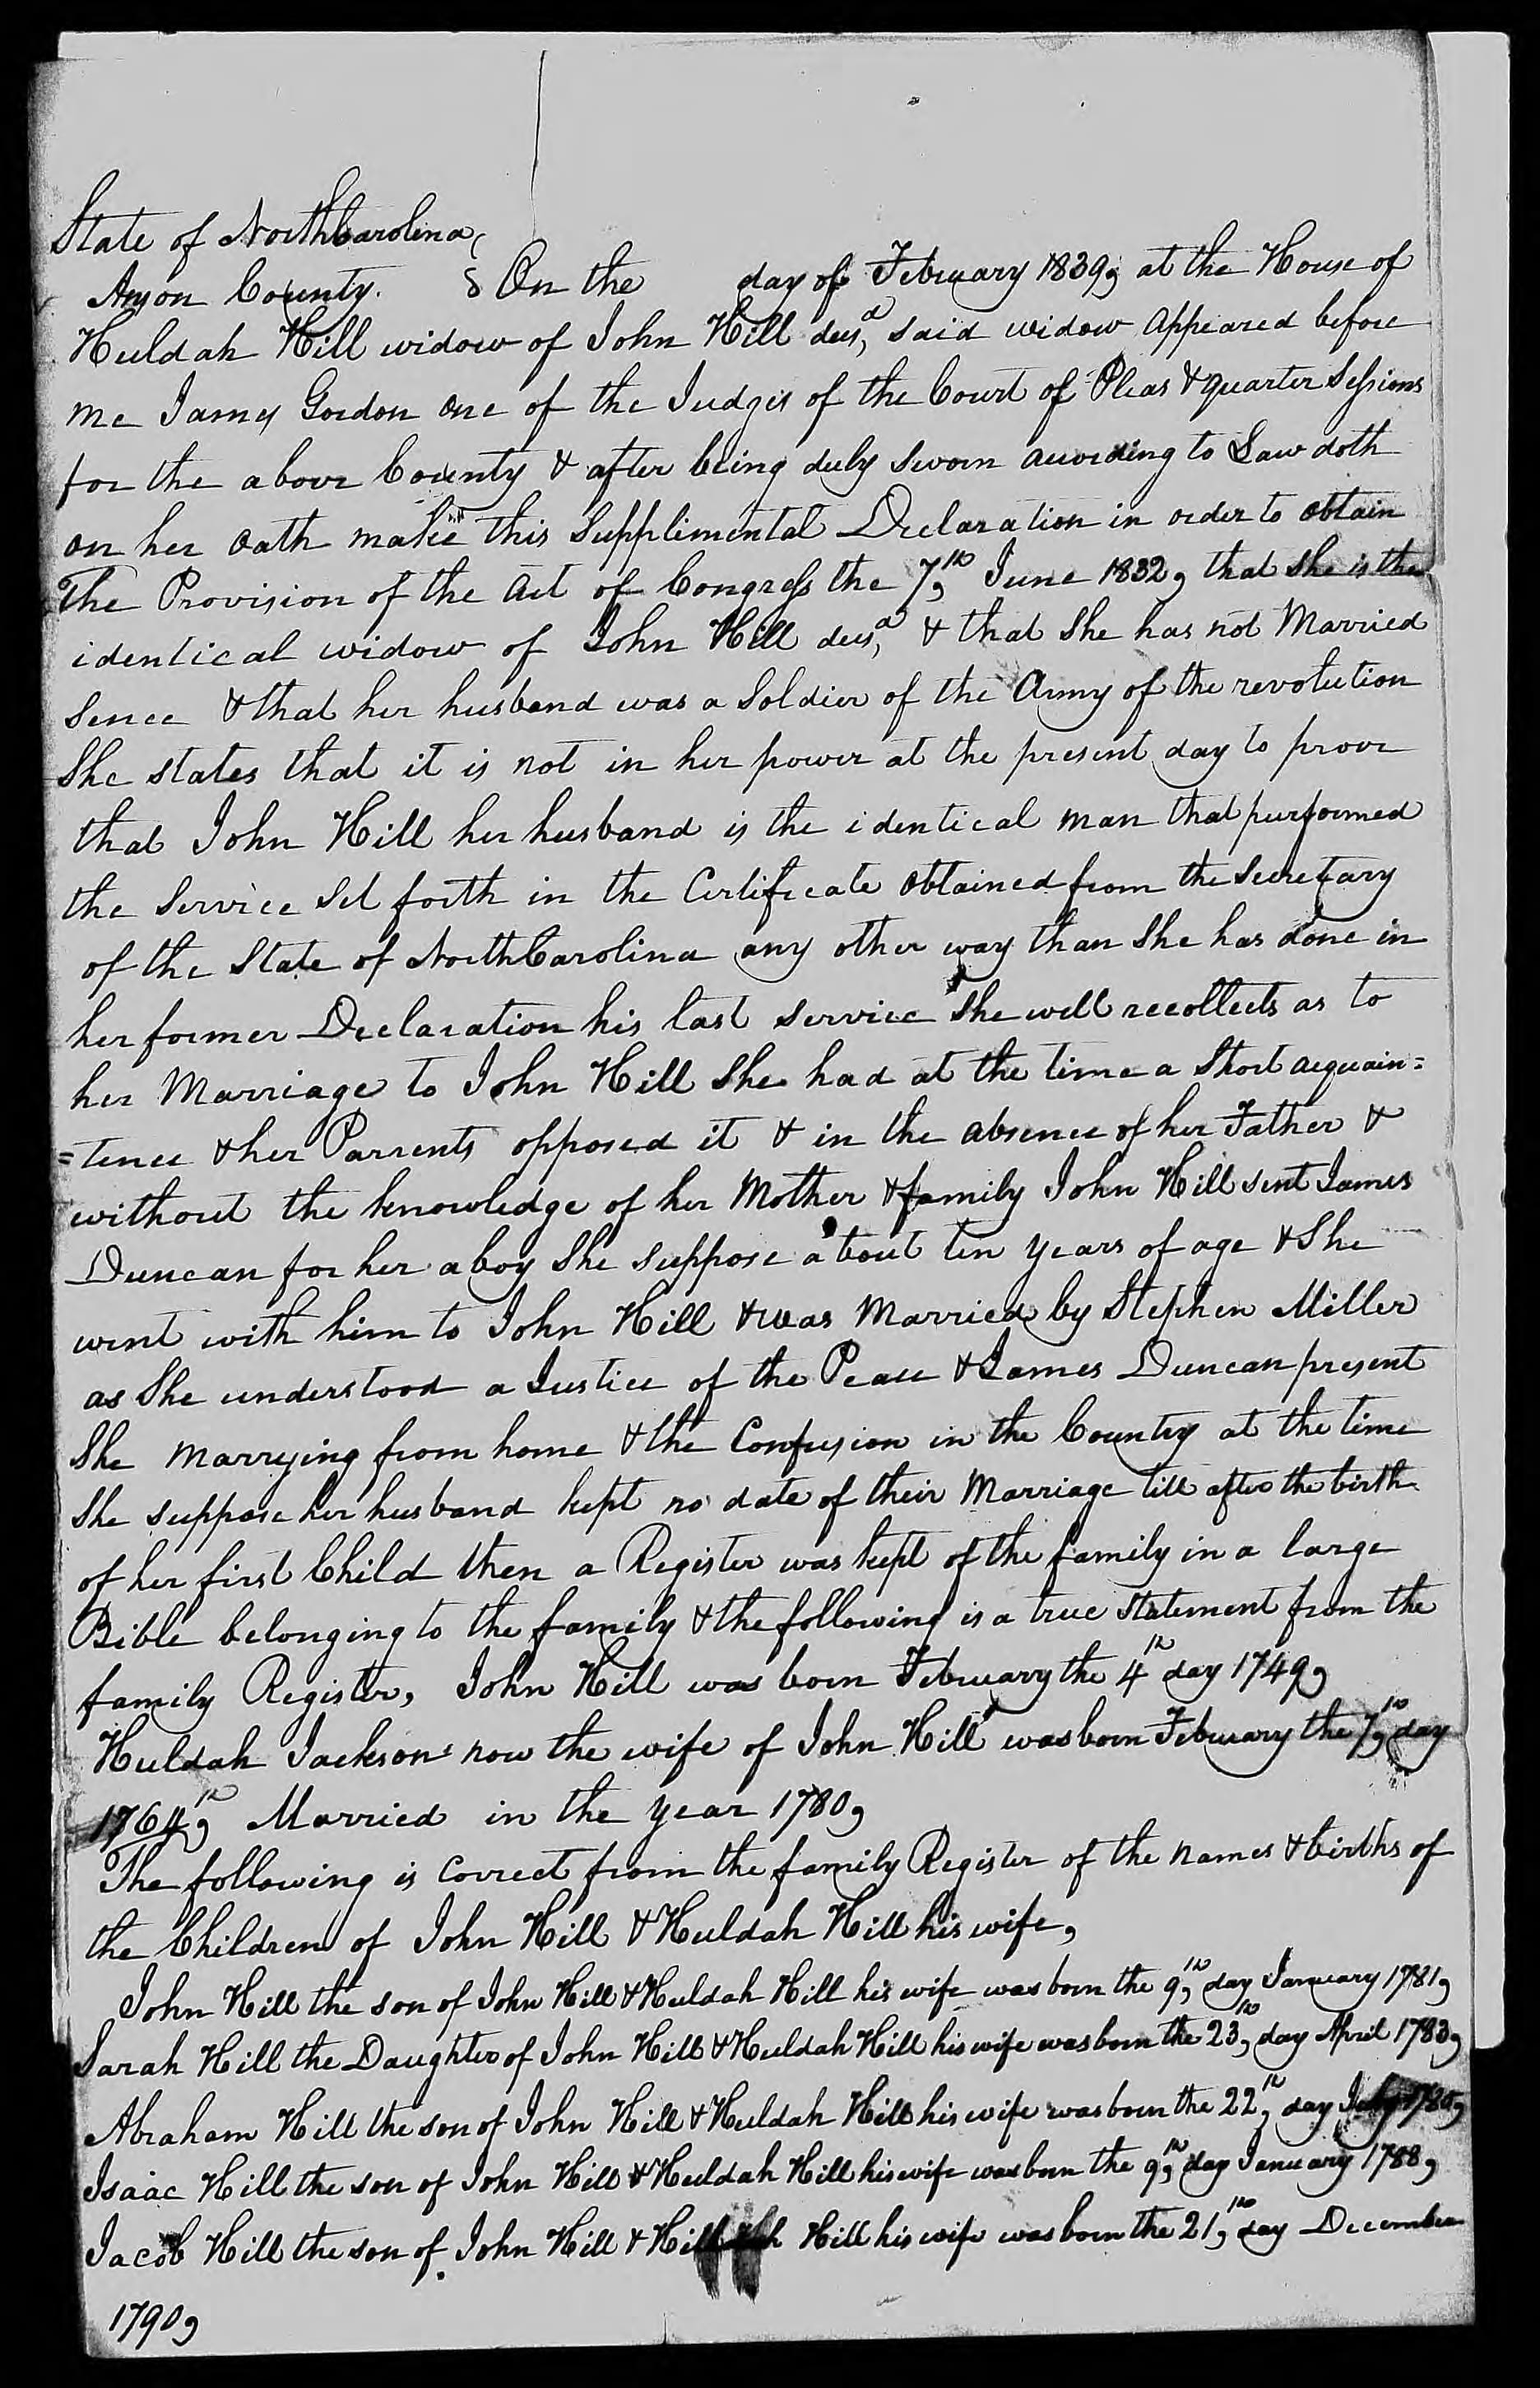 Affidavit of Huldah Hill in support of her Pension Claim, 22 February 1839, page 1